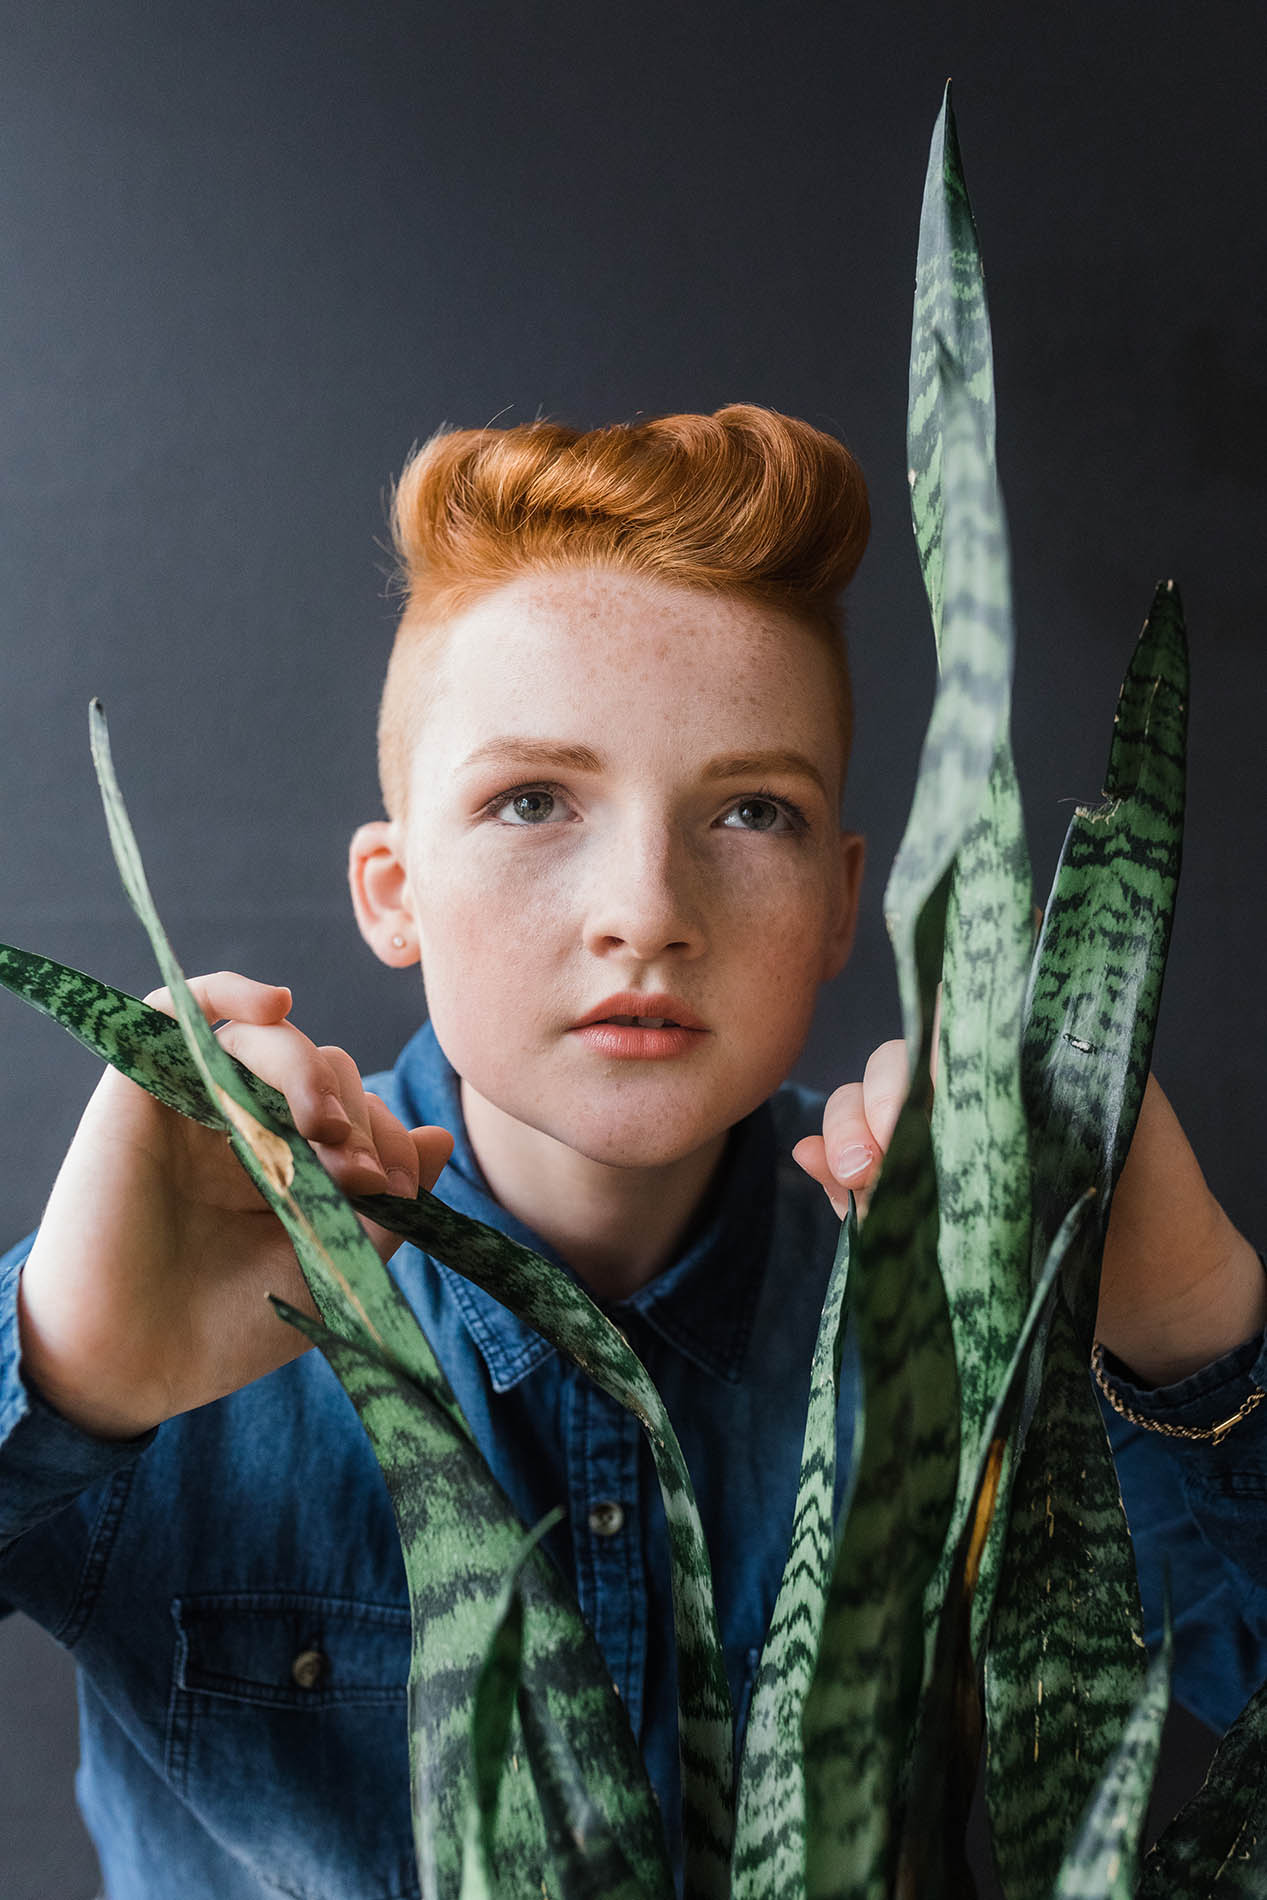 Dallas fashion photography; a young teen wearing a blue shirt, makeup, and an earring looking with determination through a plant in front of a dark background